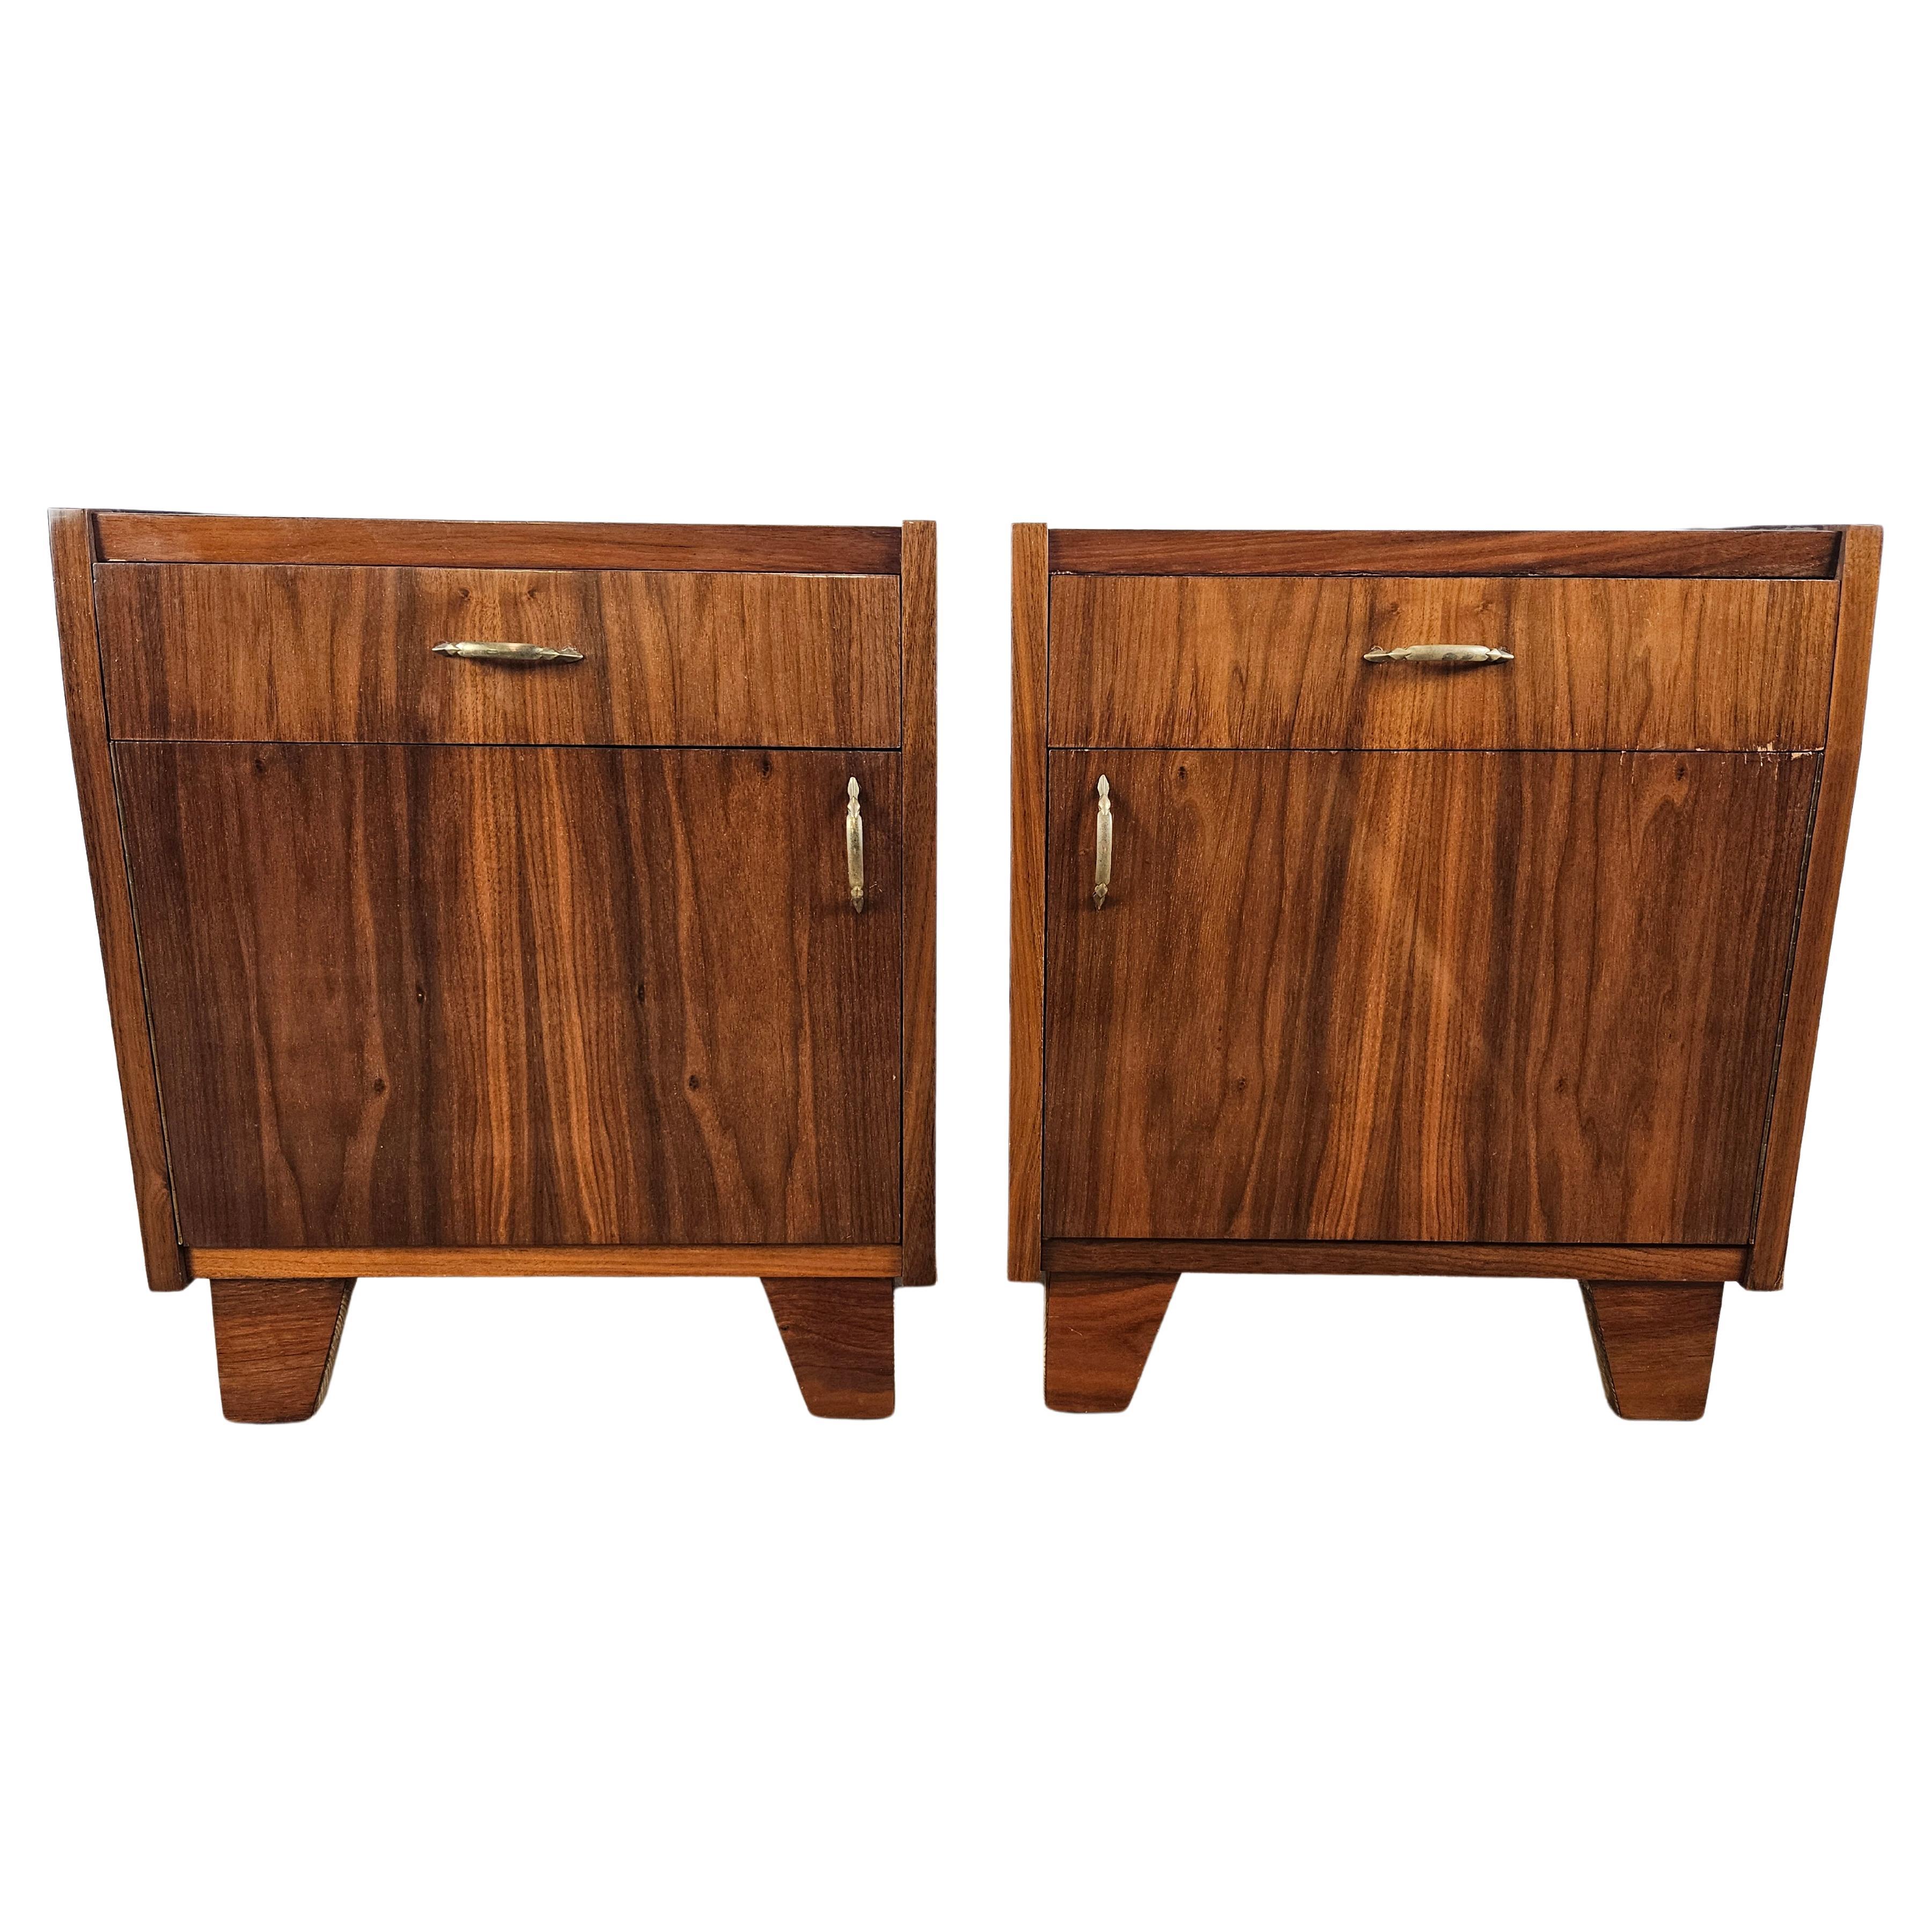 1950s glossy nightstands with drawer